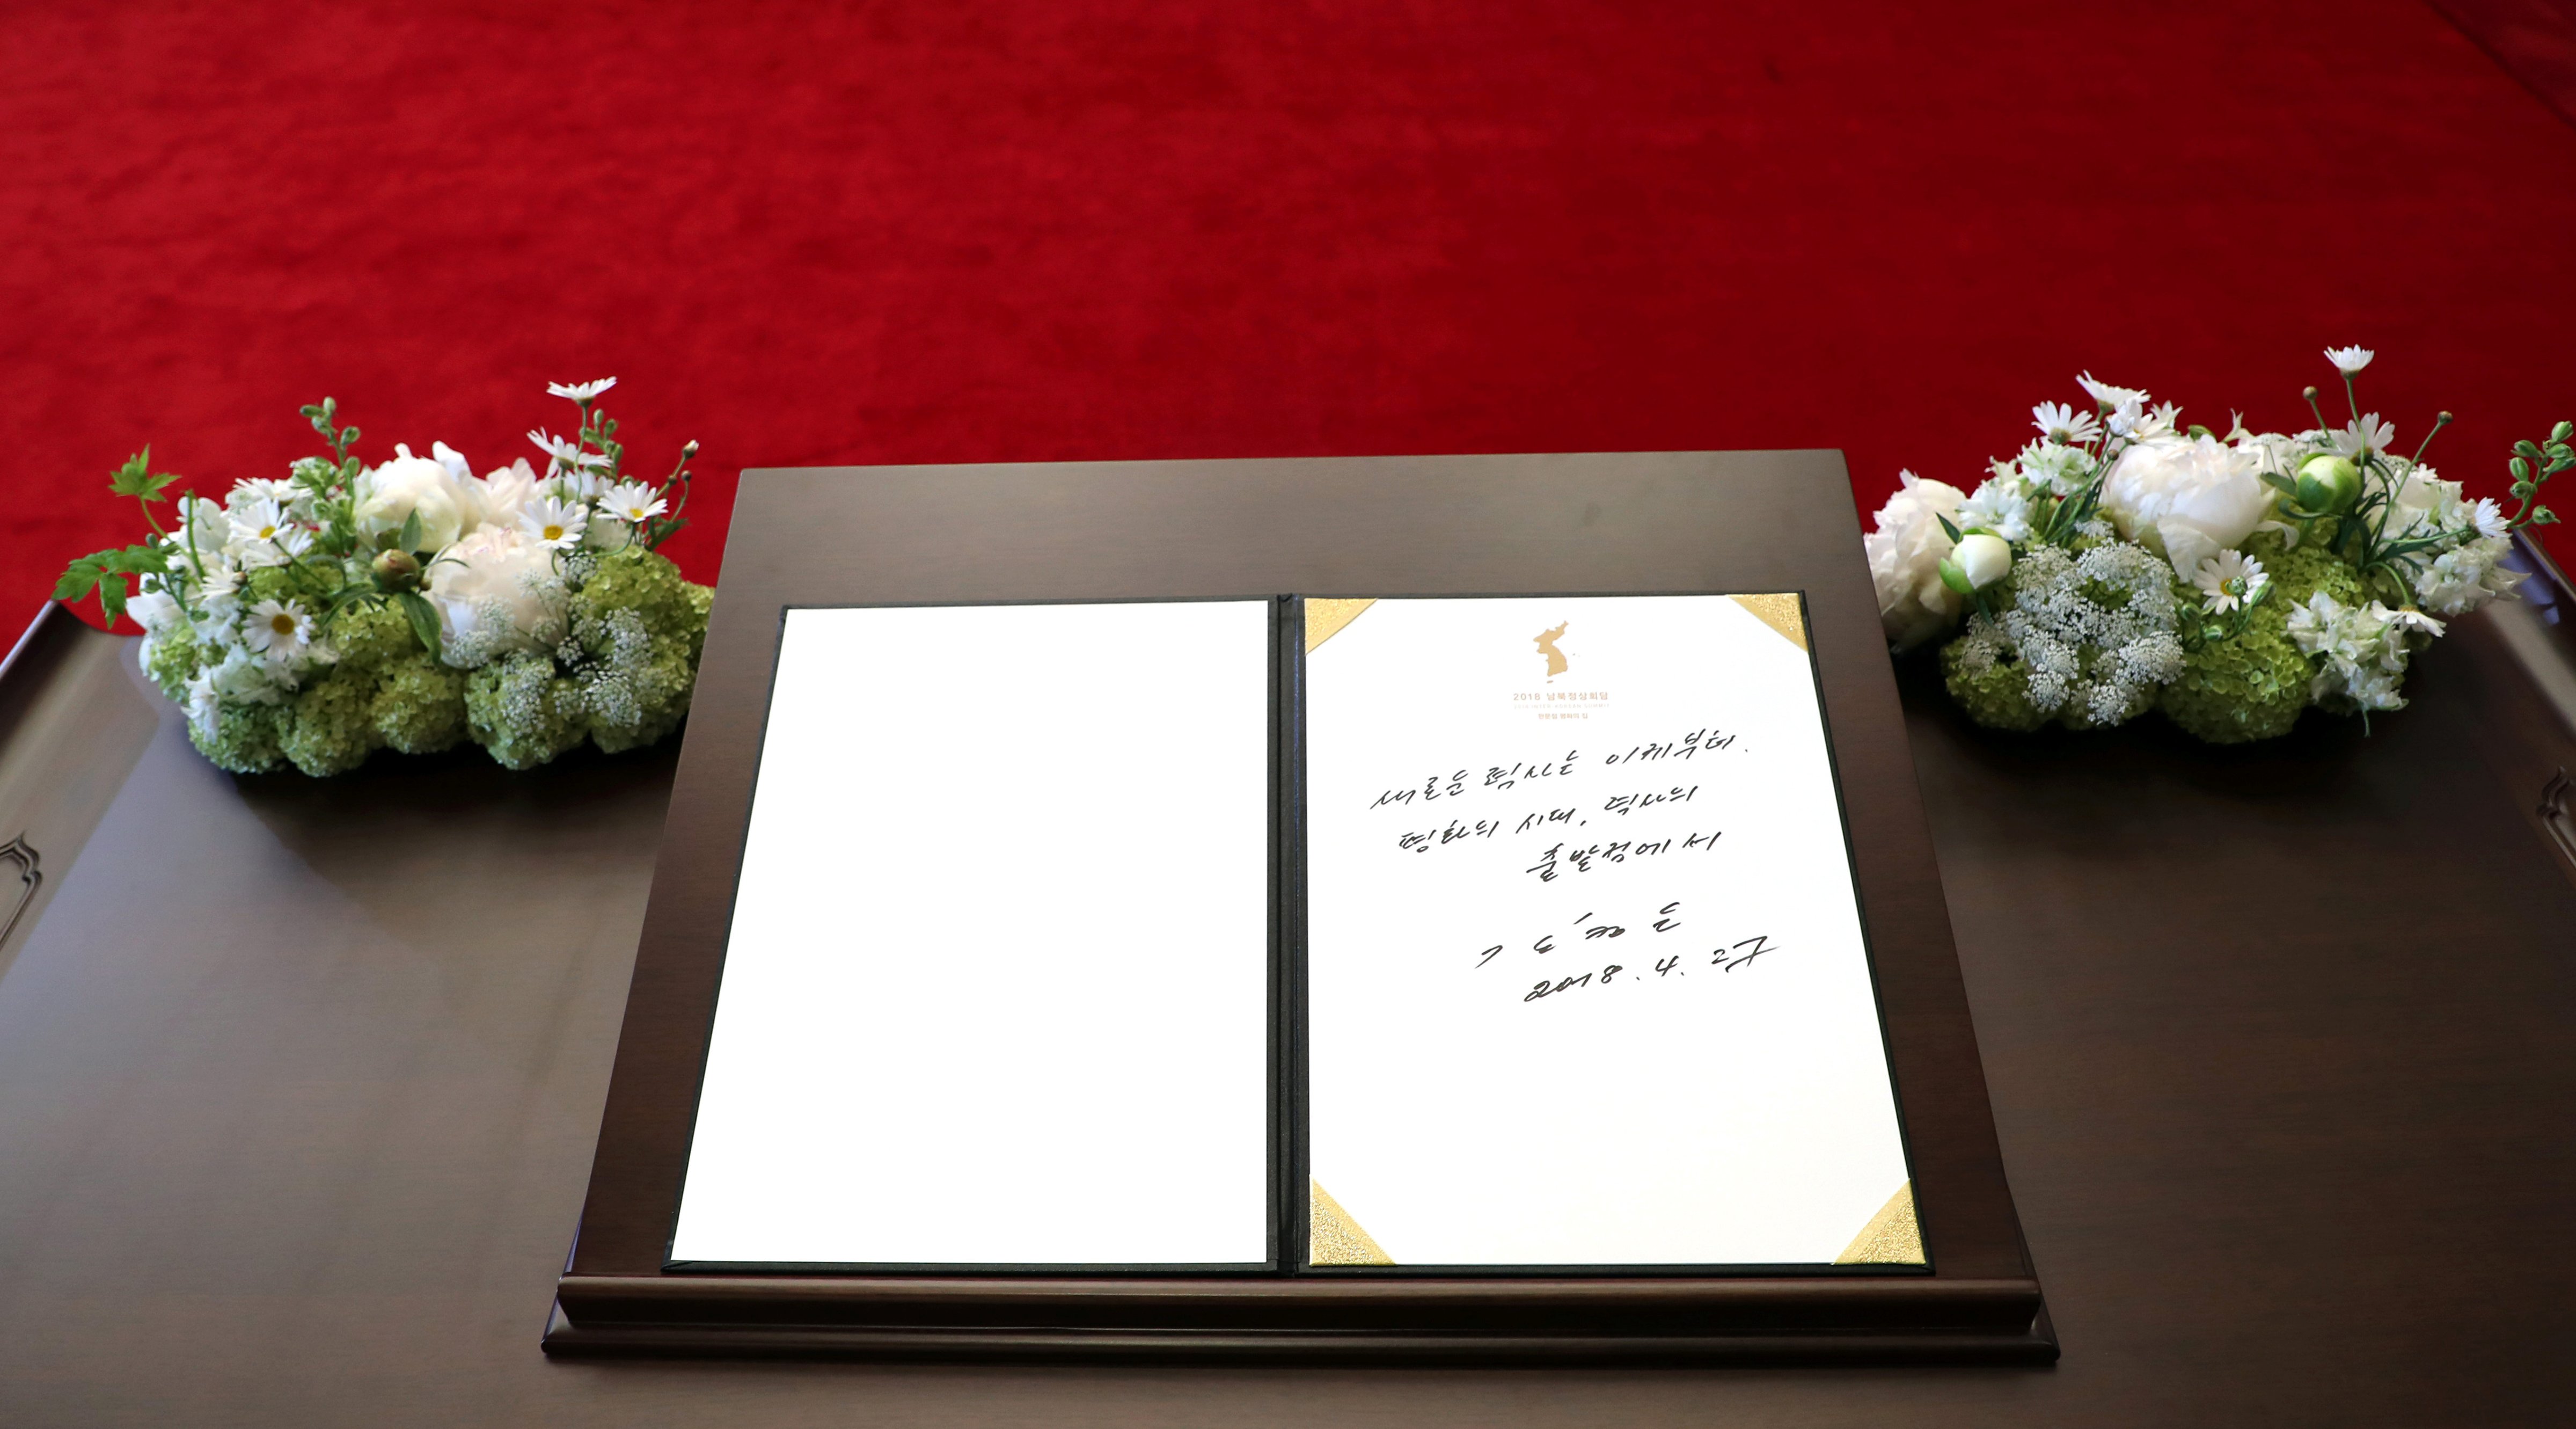 North Korean leader Kim Jong Un's entry in a guestbook at the Peace House in the demilitarized zone separating the two Koreas, South Korea, April 27, 2018. The writing reads 